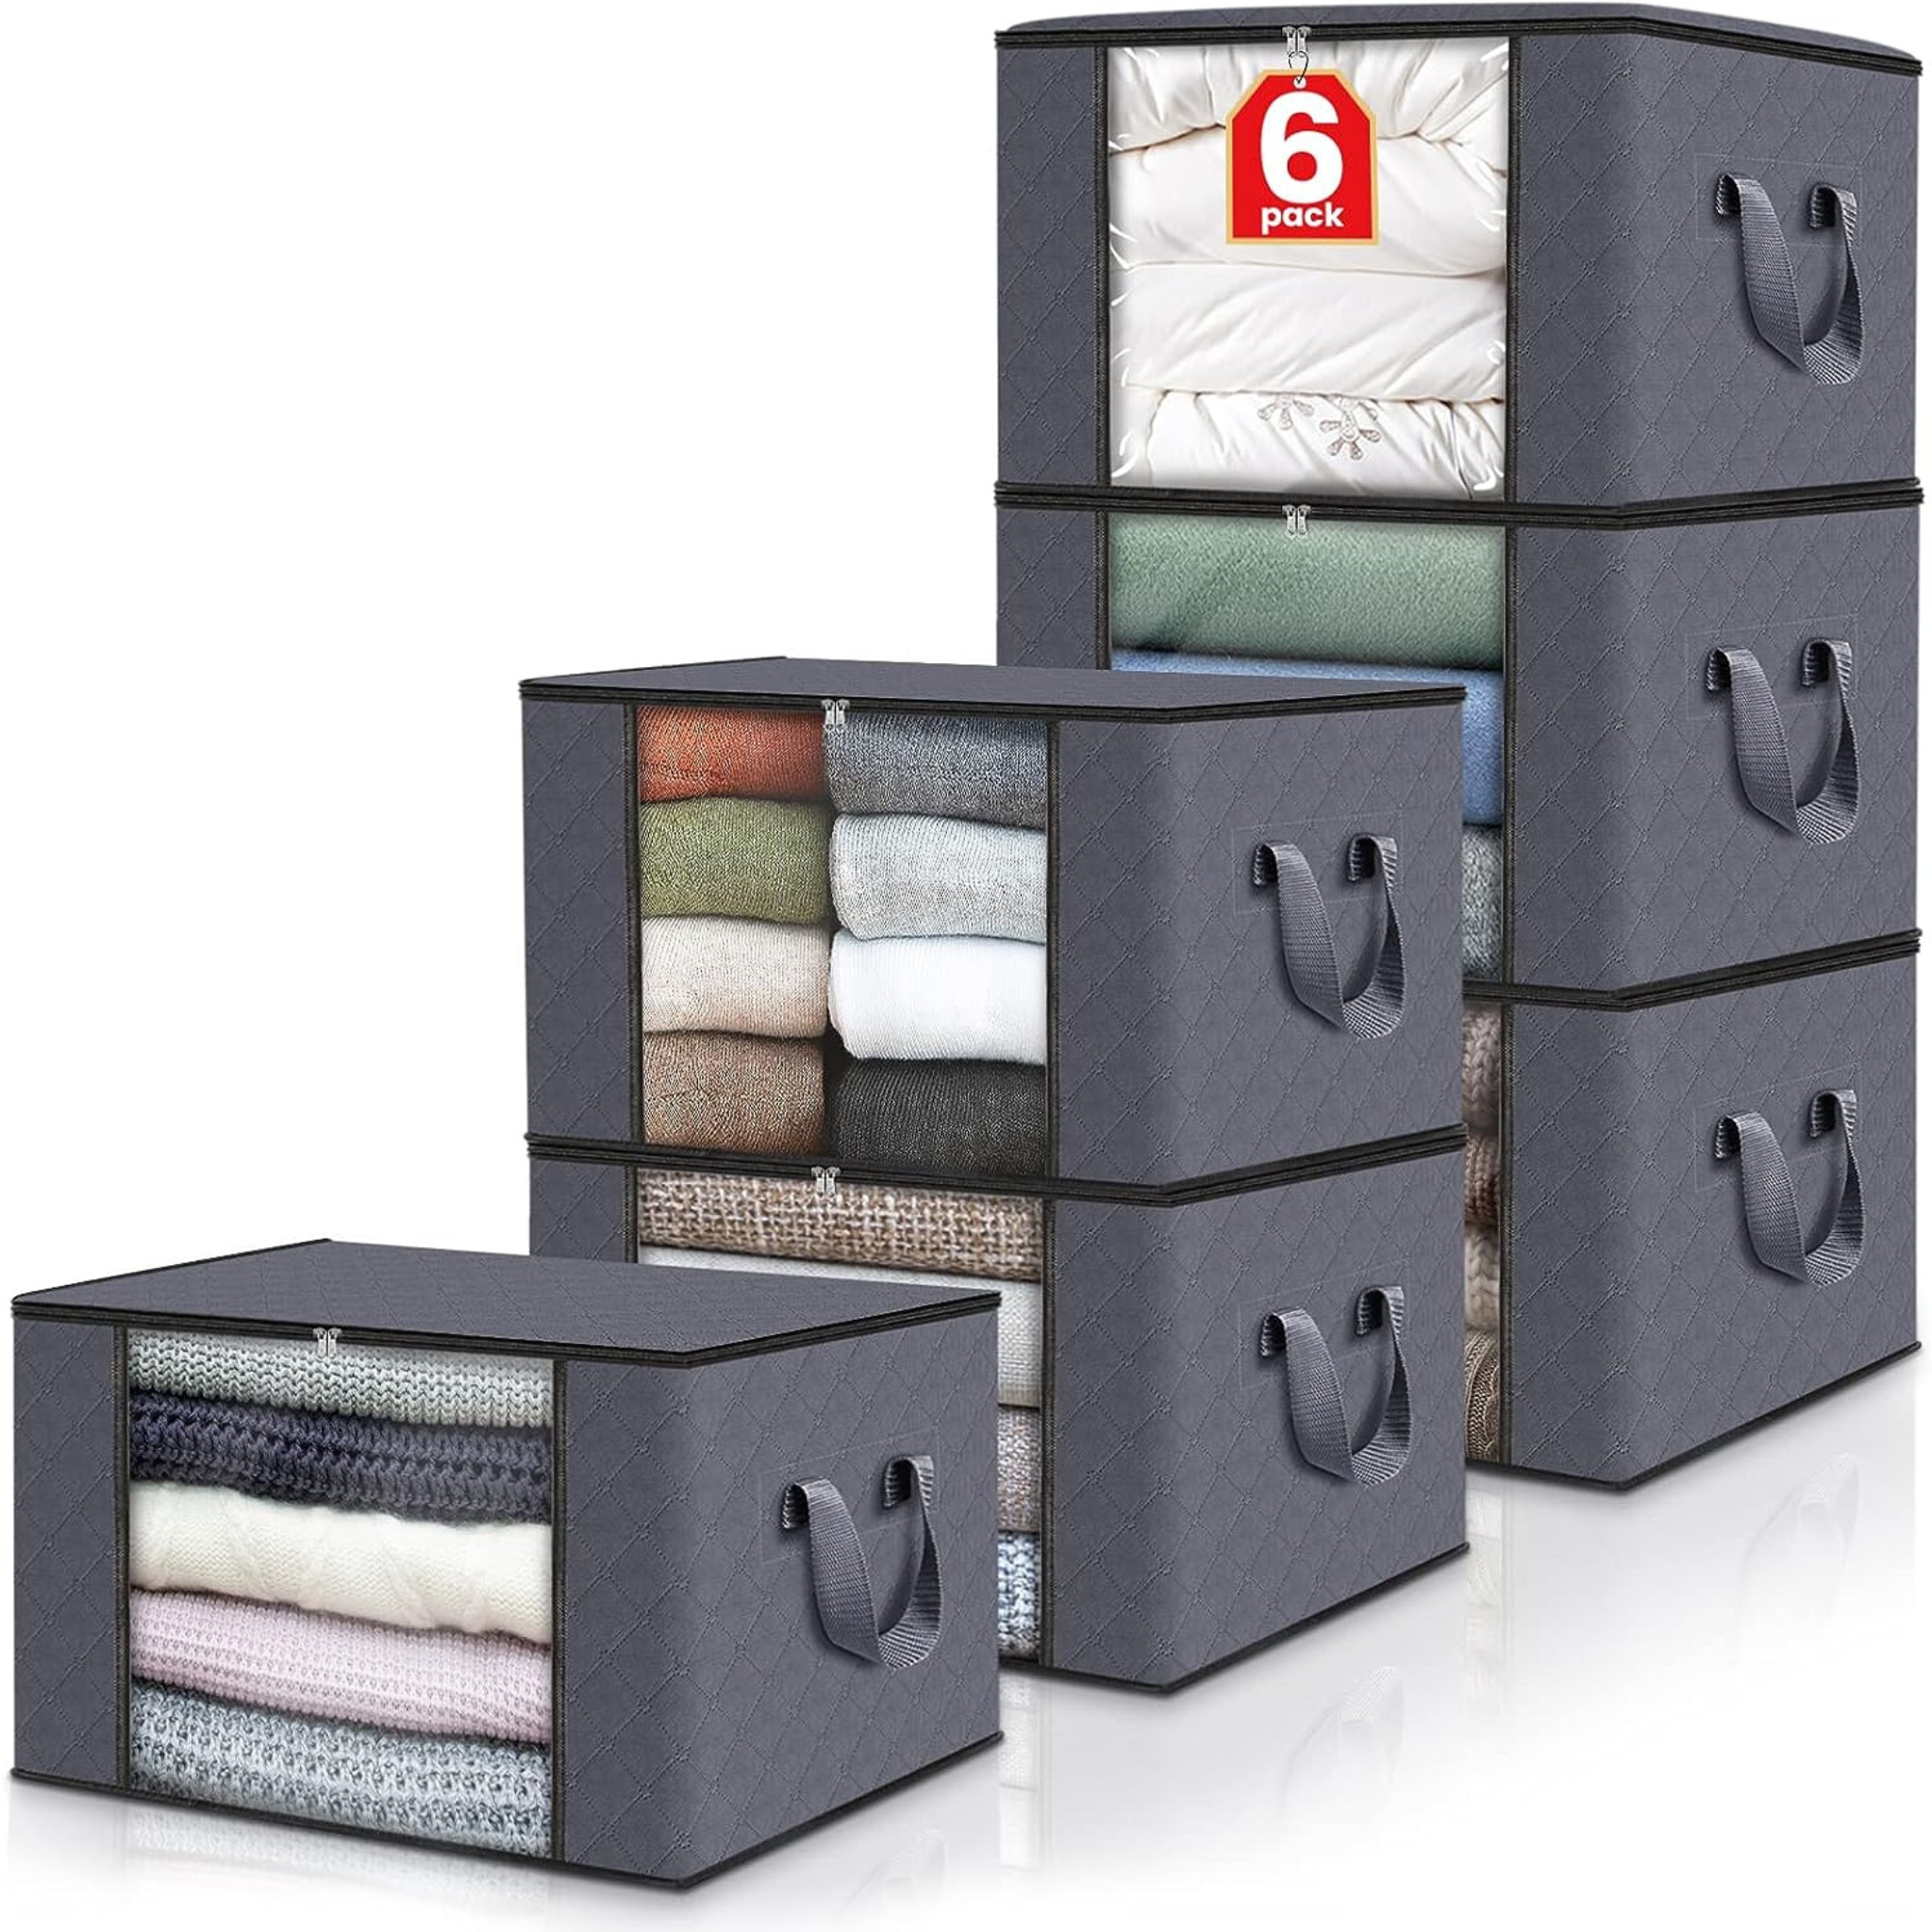 6-Pack Fab Totes Foldable Blanket Storage Bags with Lids and Handle